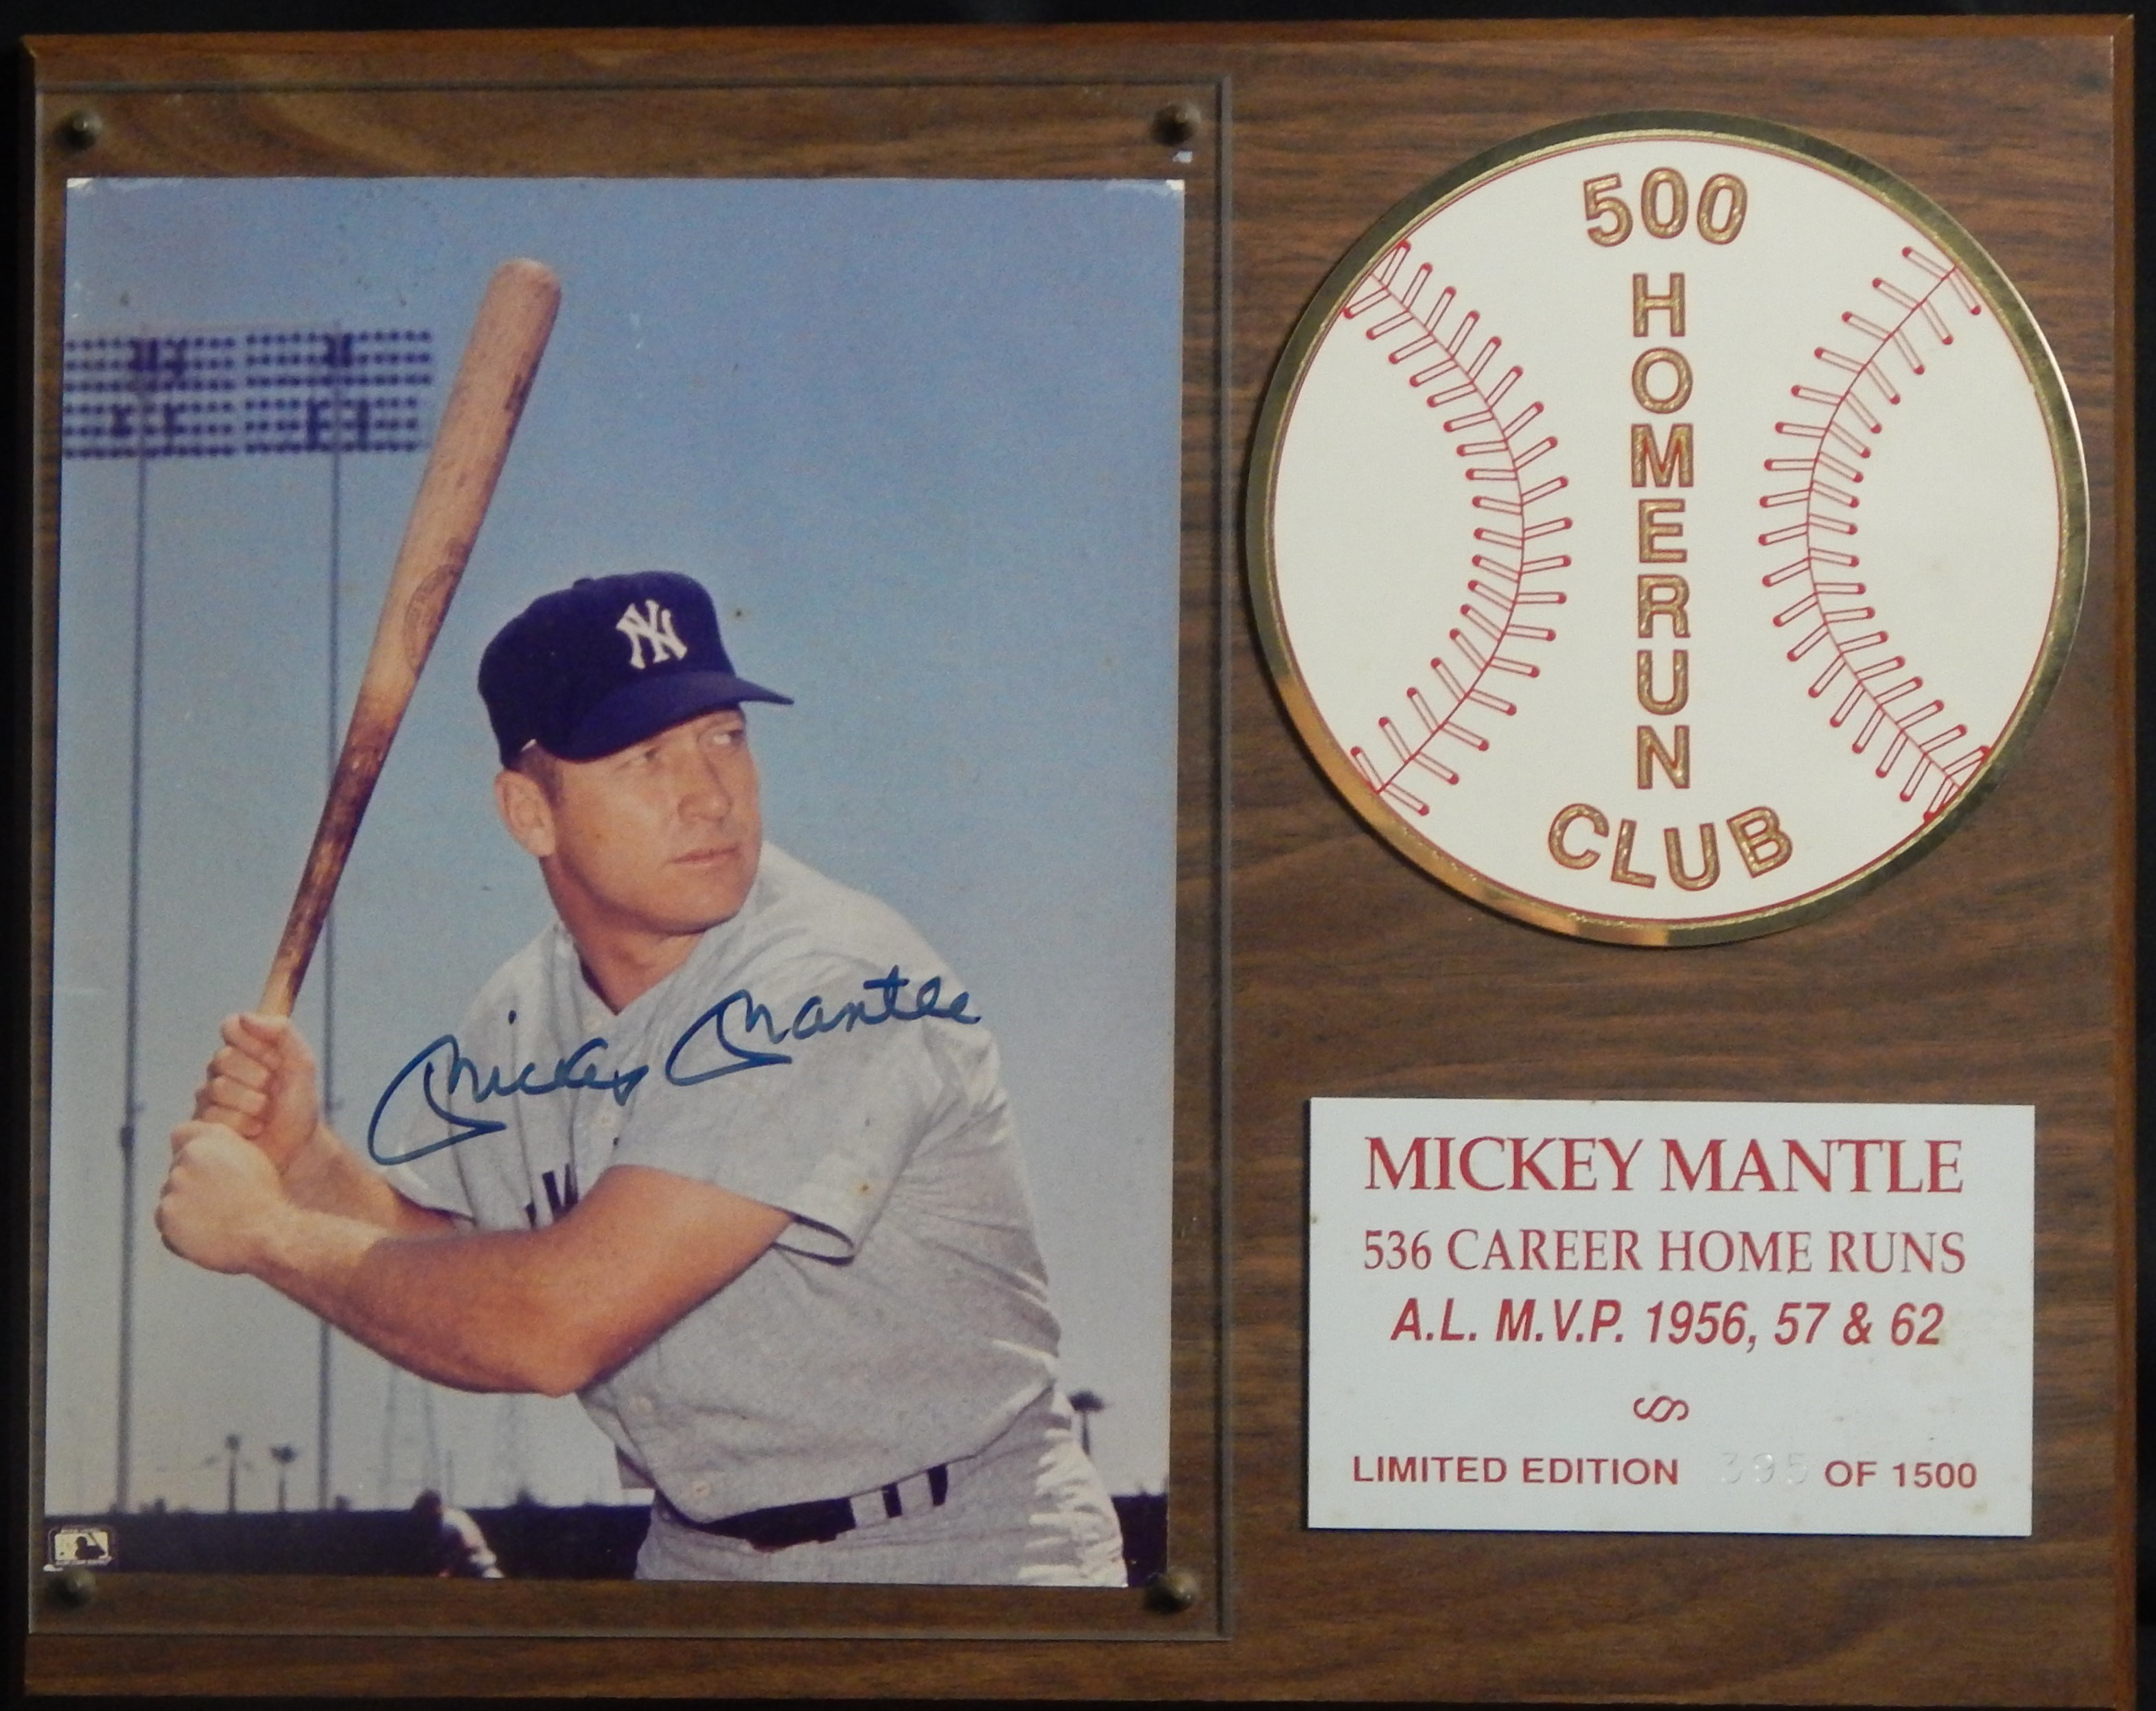 - Mickey Mantle Signed 500 HR Club Plaque